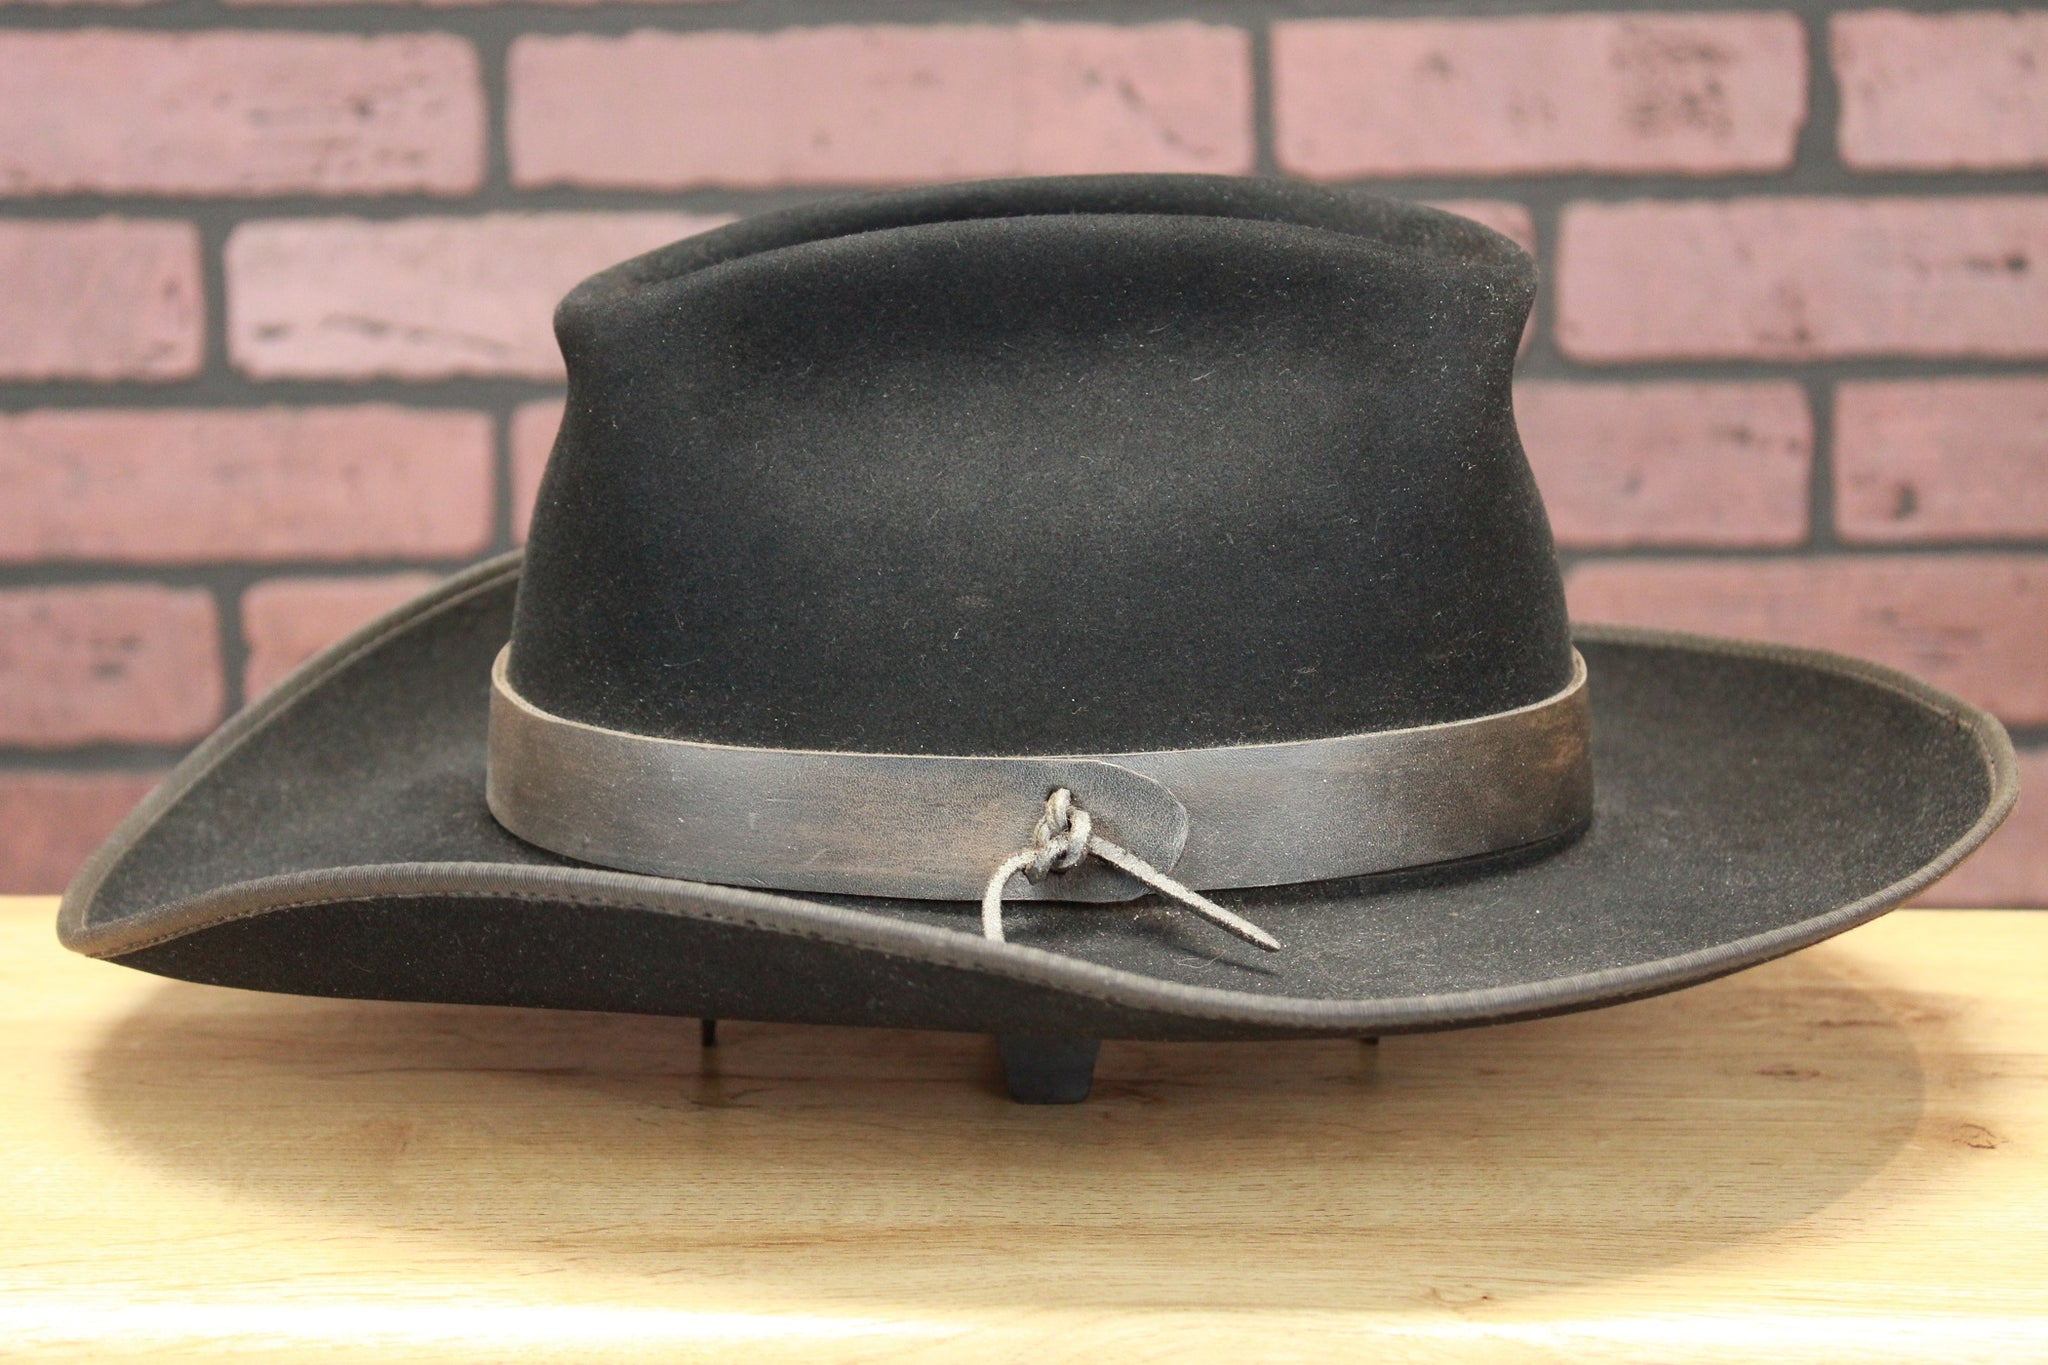 A classic Cowboy hat inspired by the classic TV series The Virginian circa 1962.